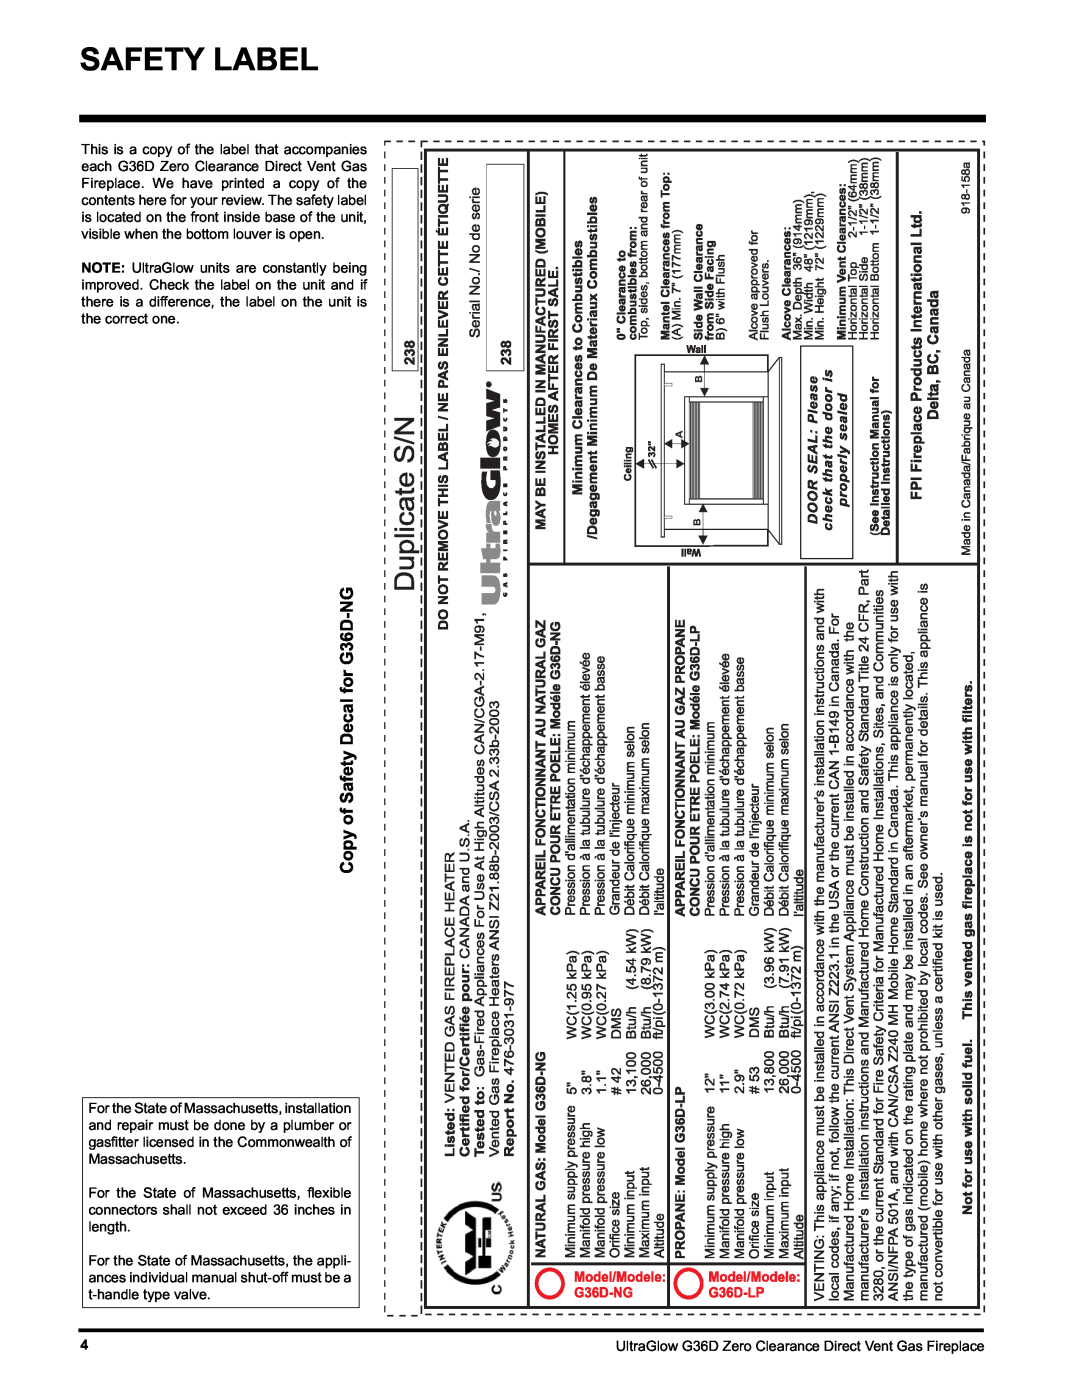 Regency G36D-LP PROPANE, G36D-NG NATURAL GAS installation manual Safety Label, Copy of Safety Decal for G36D-NG 